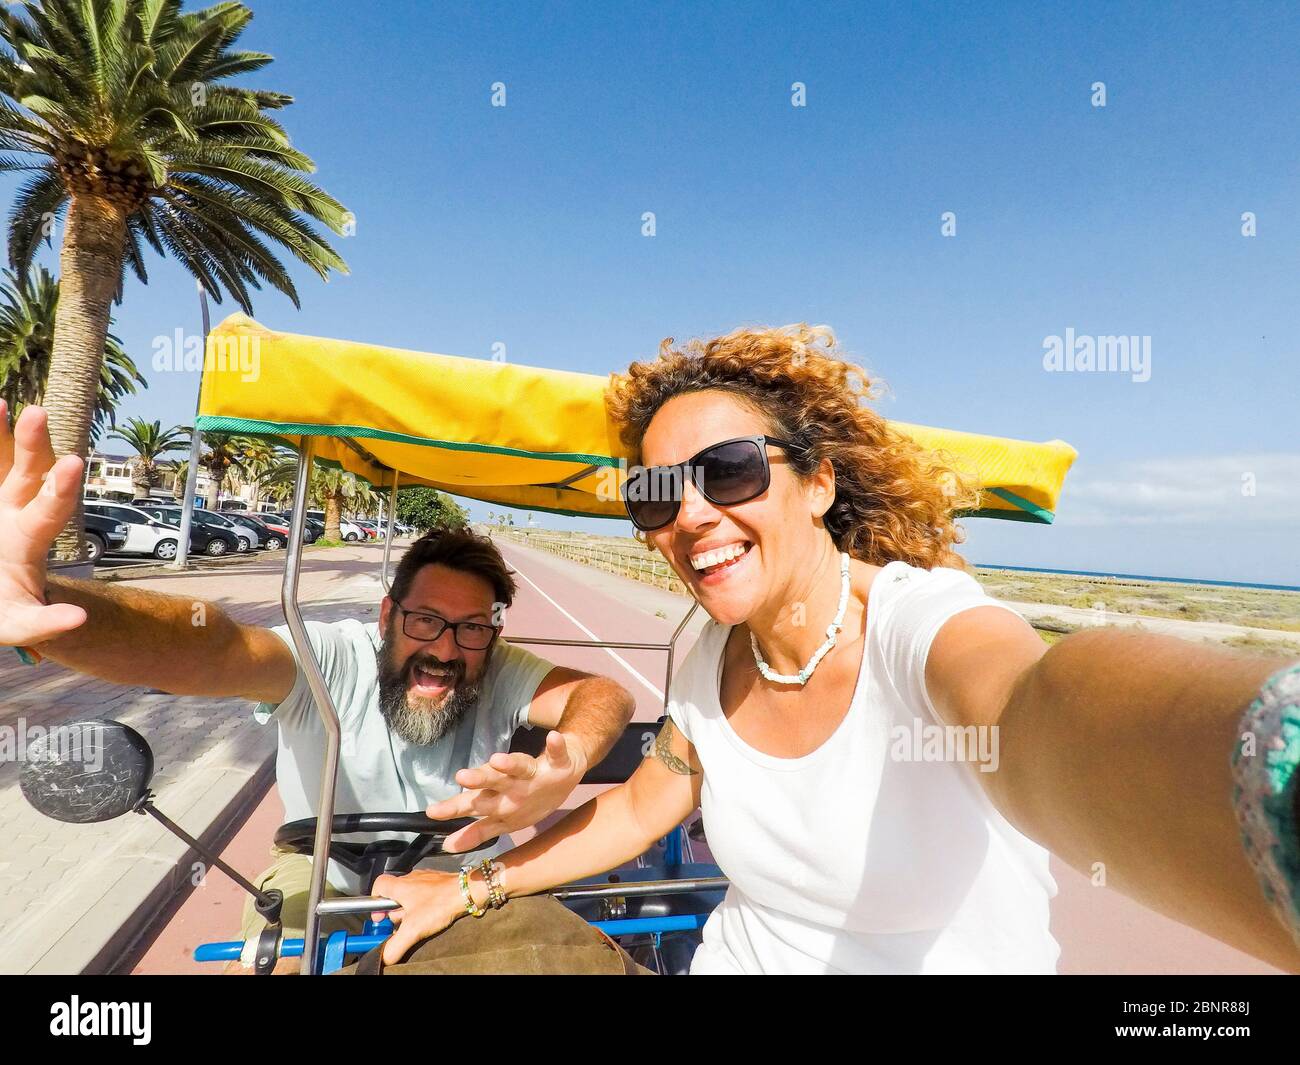 Happy and cheerful adult beautiful couple enjoying the outdoor leisure actvity on vacation with rented funny bike together laughing a lot and having fun Stock Photo